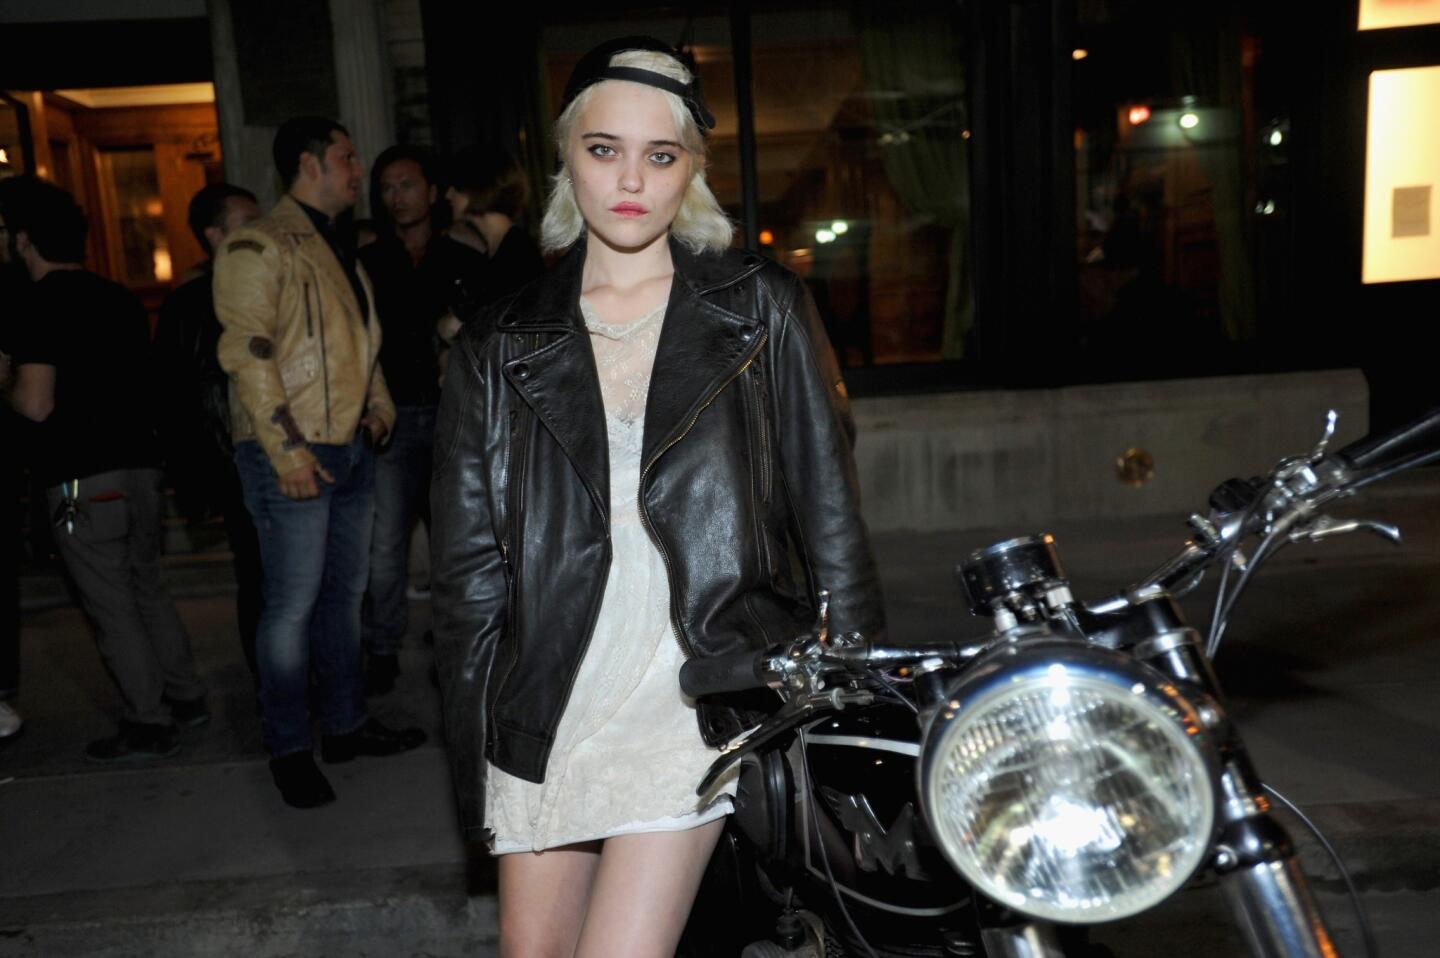 Sky Ferreira arrested on drug and vehicle charges